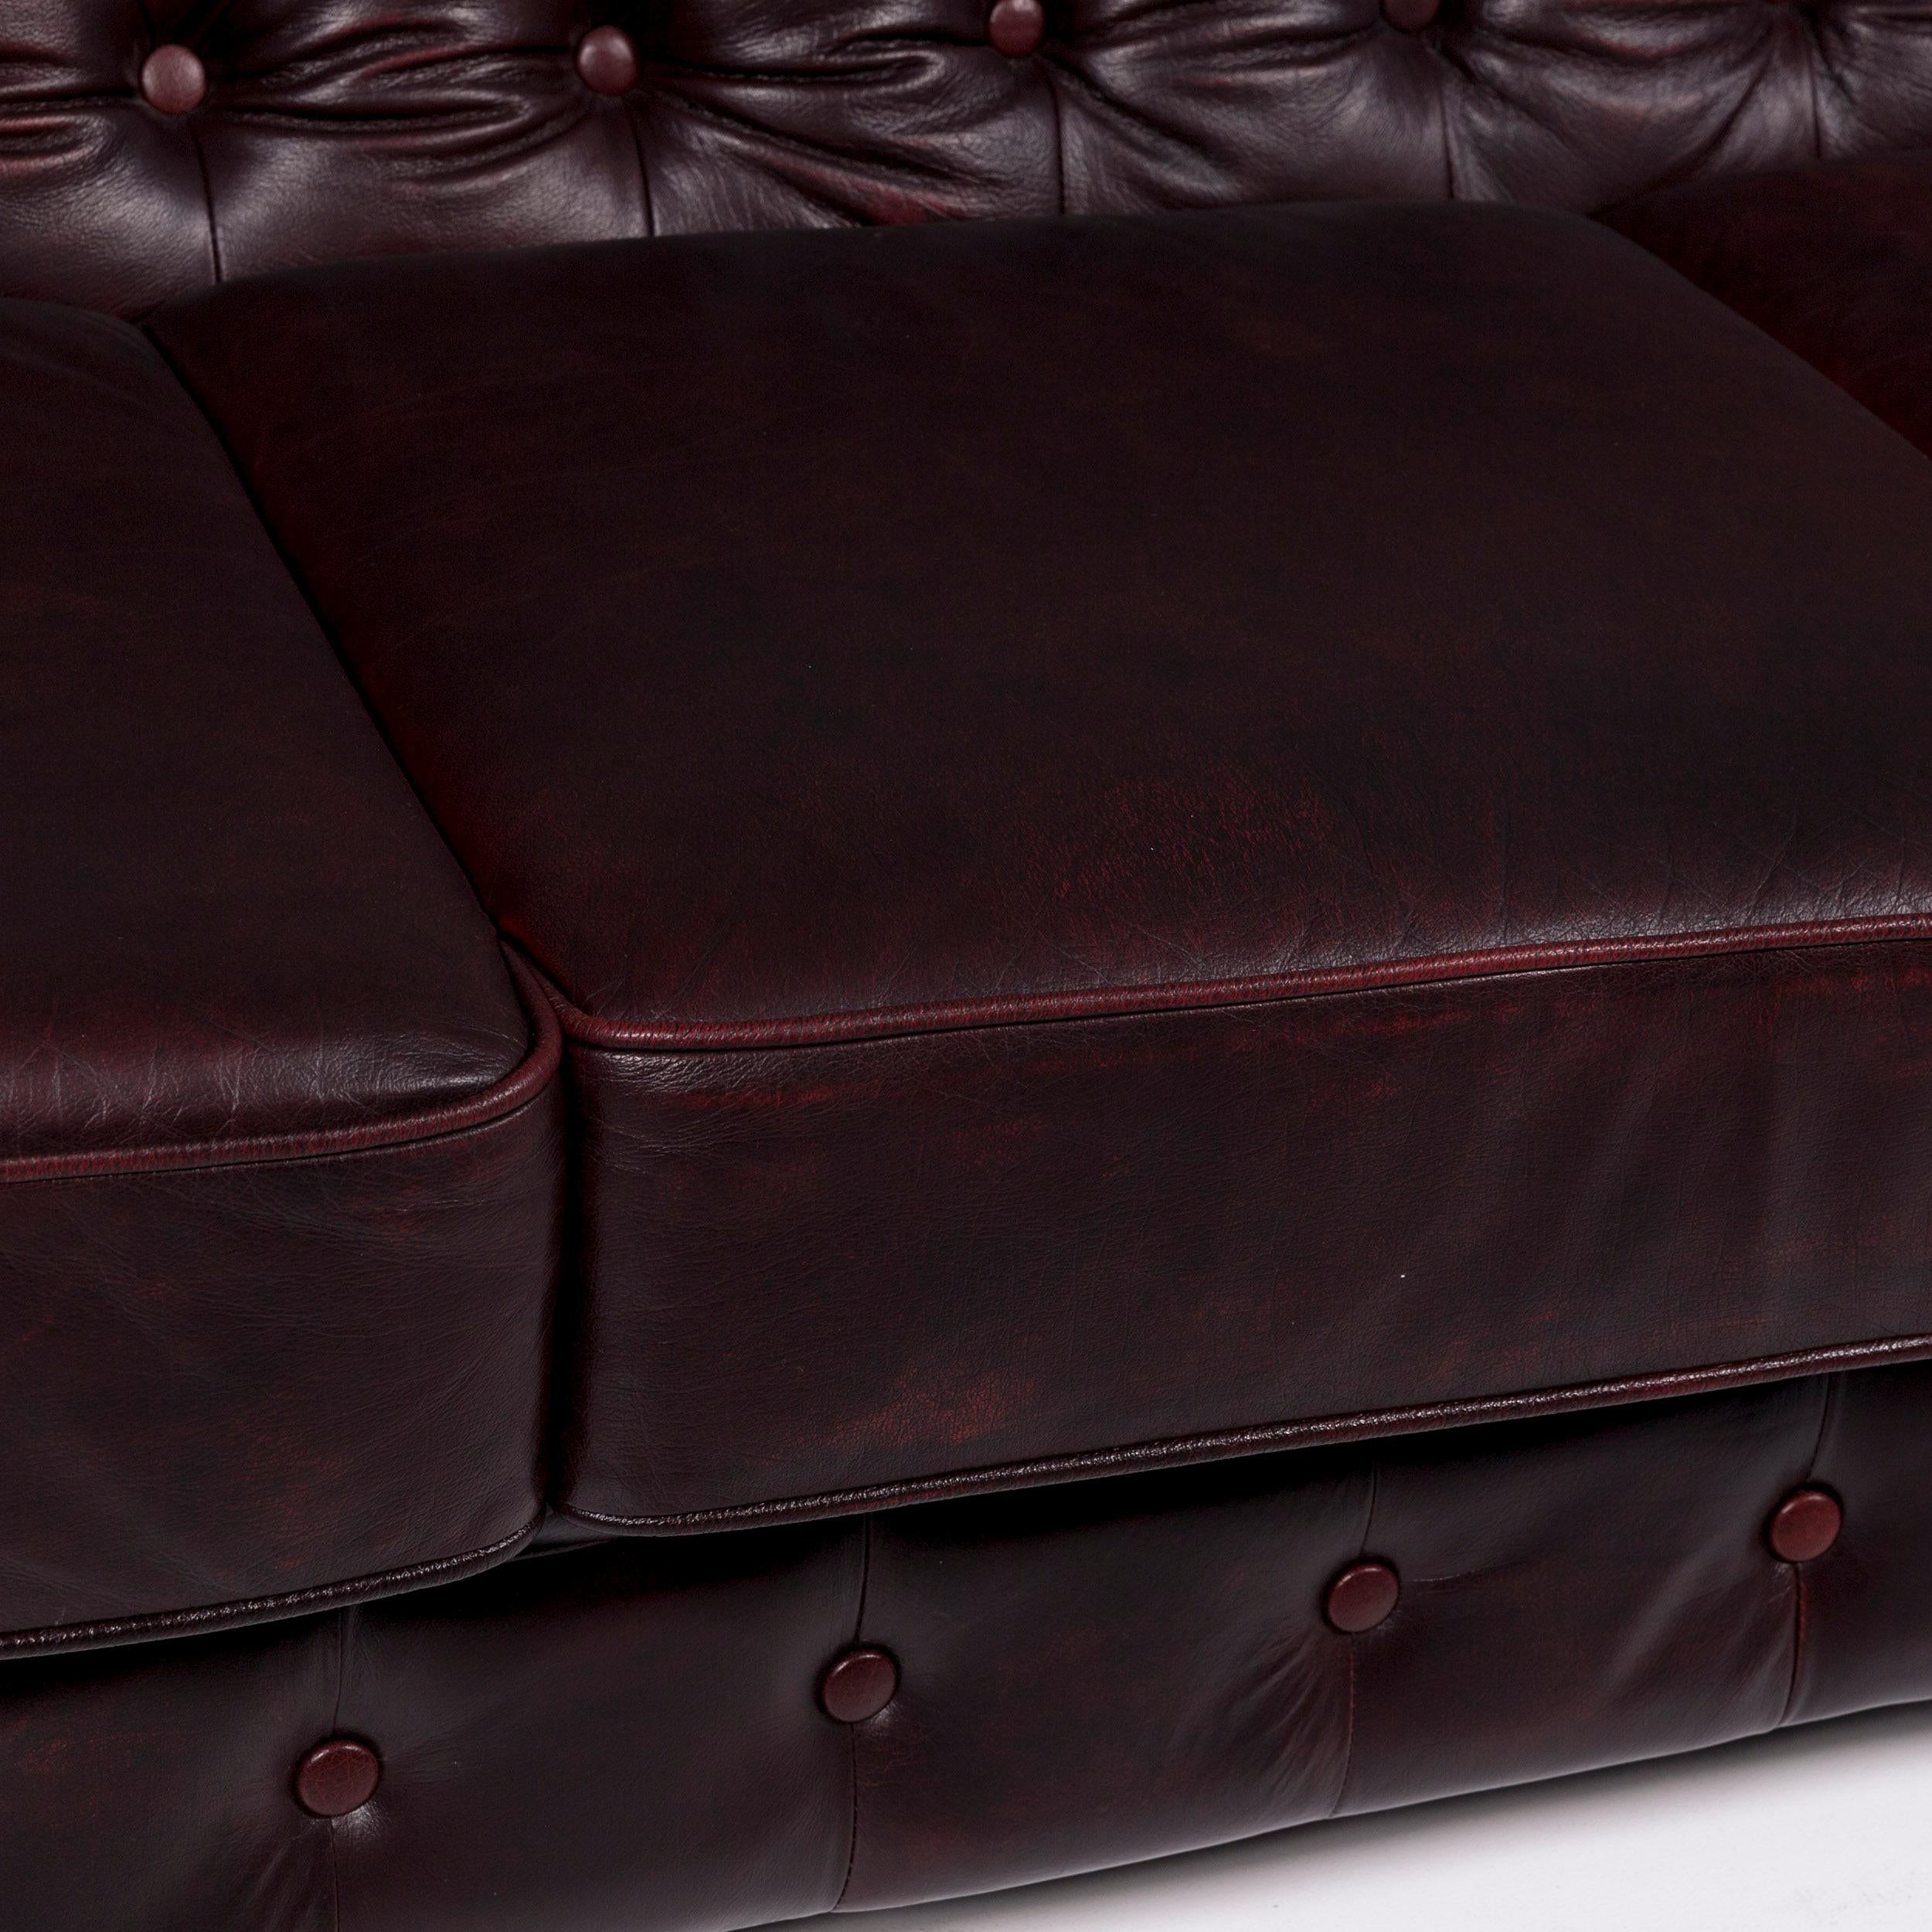 red retro couch